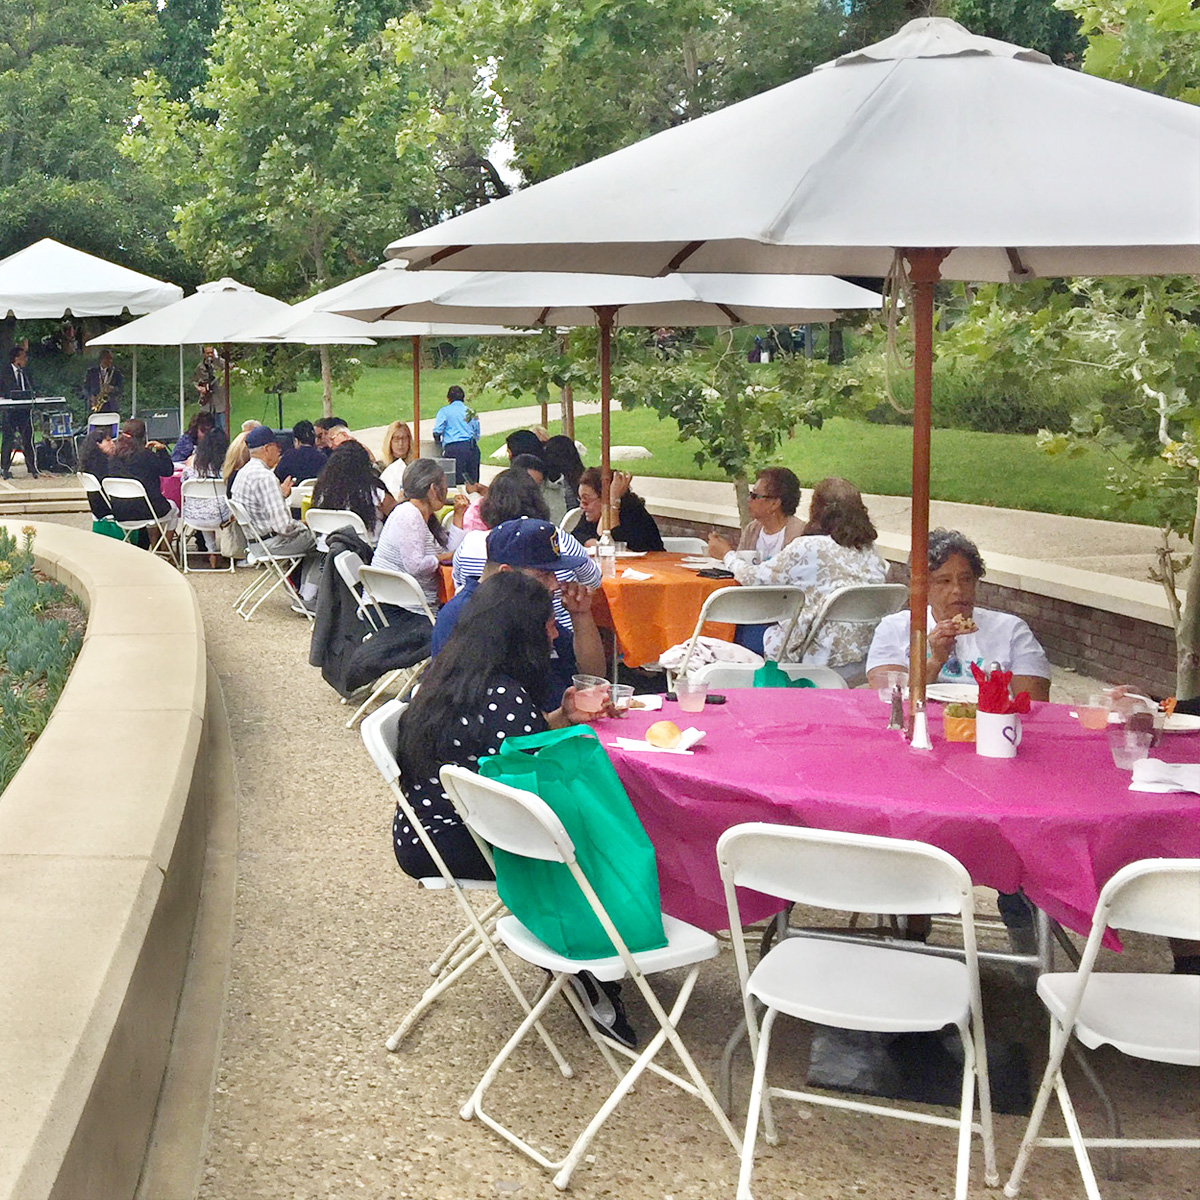 Caregiver Wellness Day participants eating lunch outside